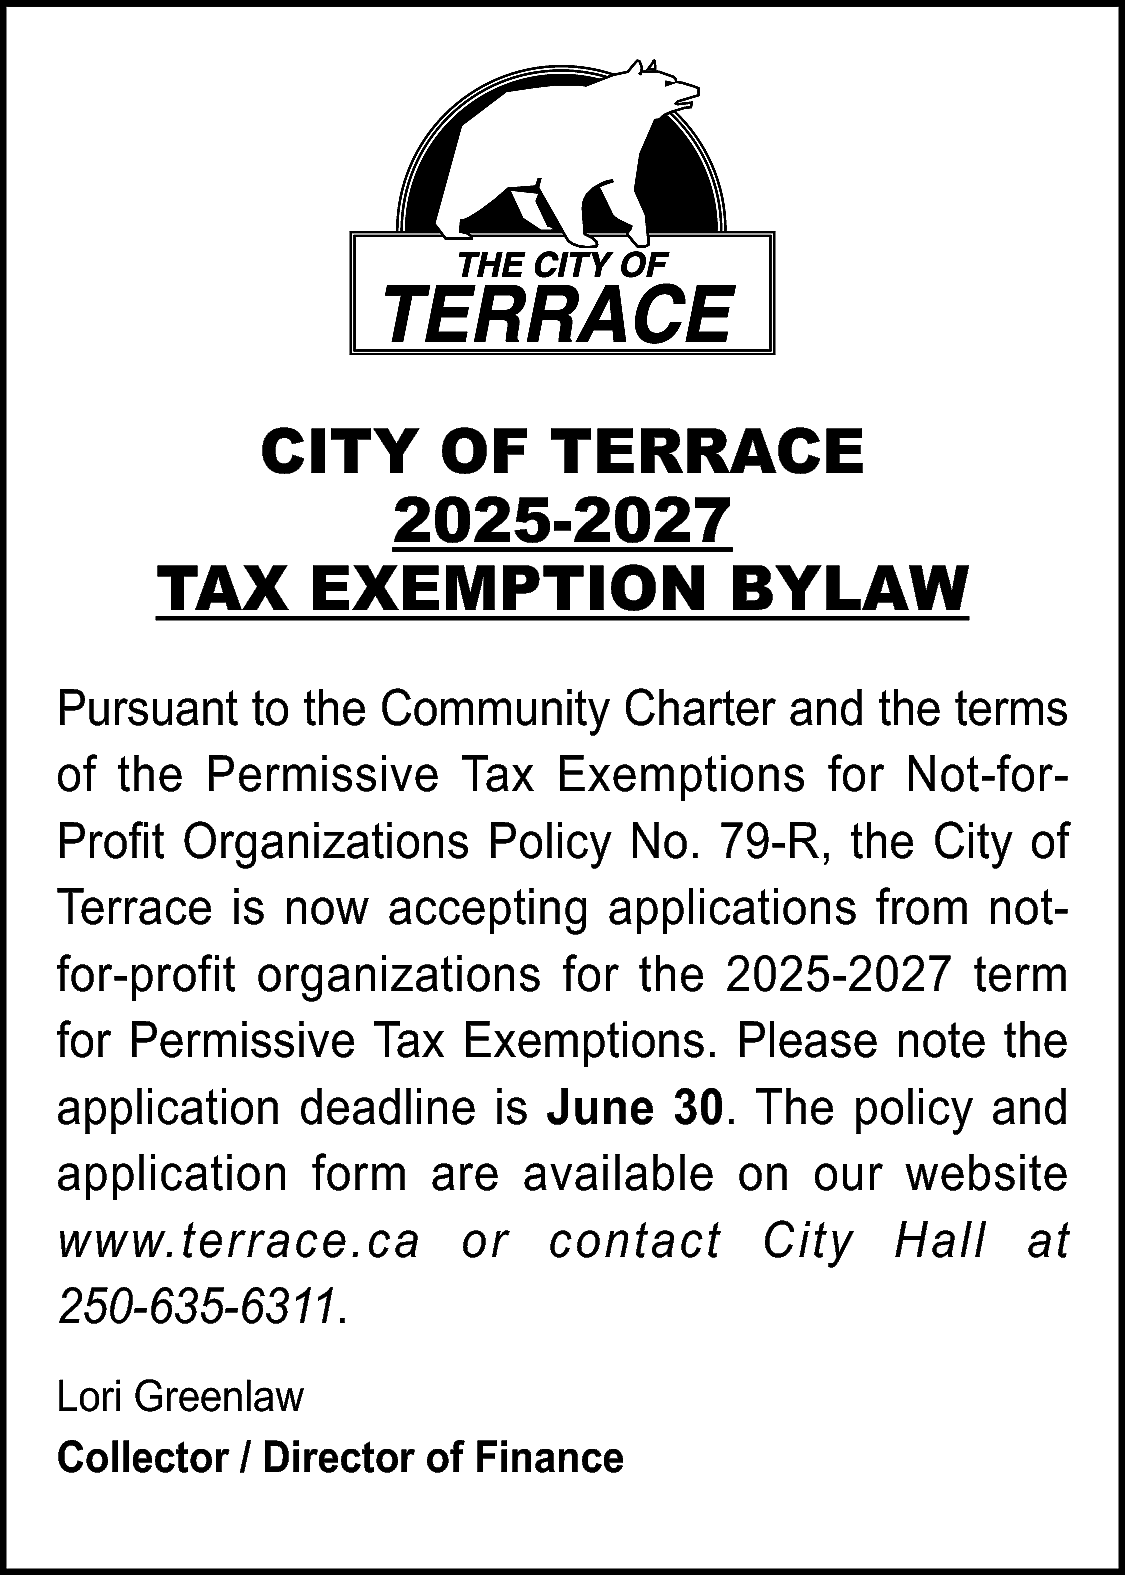 CITY OF TERRACE <br>2025-2027 <br>TAX  CITY OF TERRACE  2025-2027  TAX EXEMPTION BYLAW  Pursuant to the Community Charter and the terms  of the Permissive Tax Exemptions for Not-forProfit Organizations Policy No. 79-R, the City of  Terrace is now accepting applications from notfor-profit organizations for the 2025-2027 term  for Permissive Tax Exemptions. Please note the  application deadline is June 30. The policy and  application form are available on our website  www.terrace.ca or contact City Hall at  250-635-6311.  Lori Greenlaw  Collector / Director of Finance    